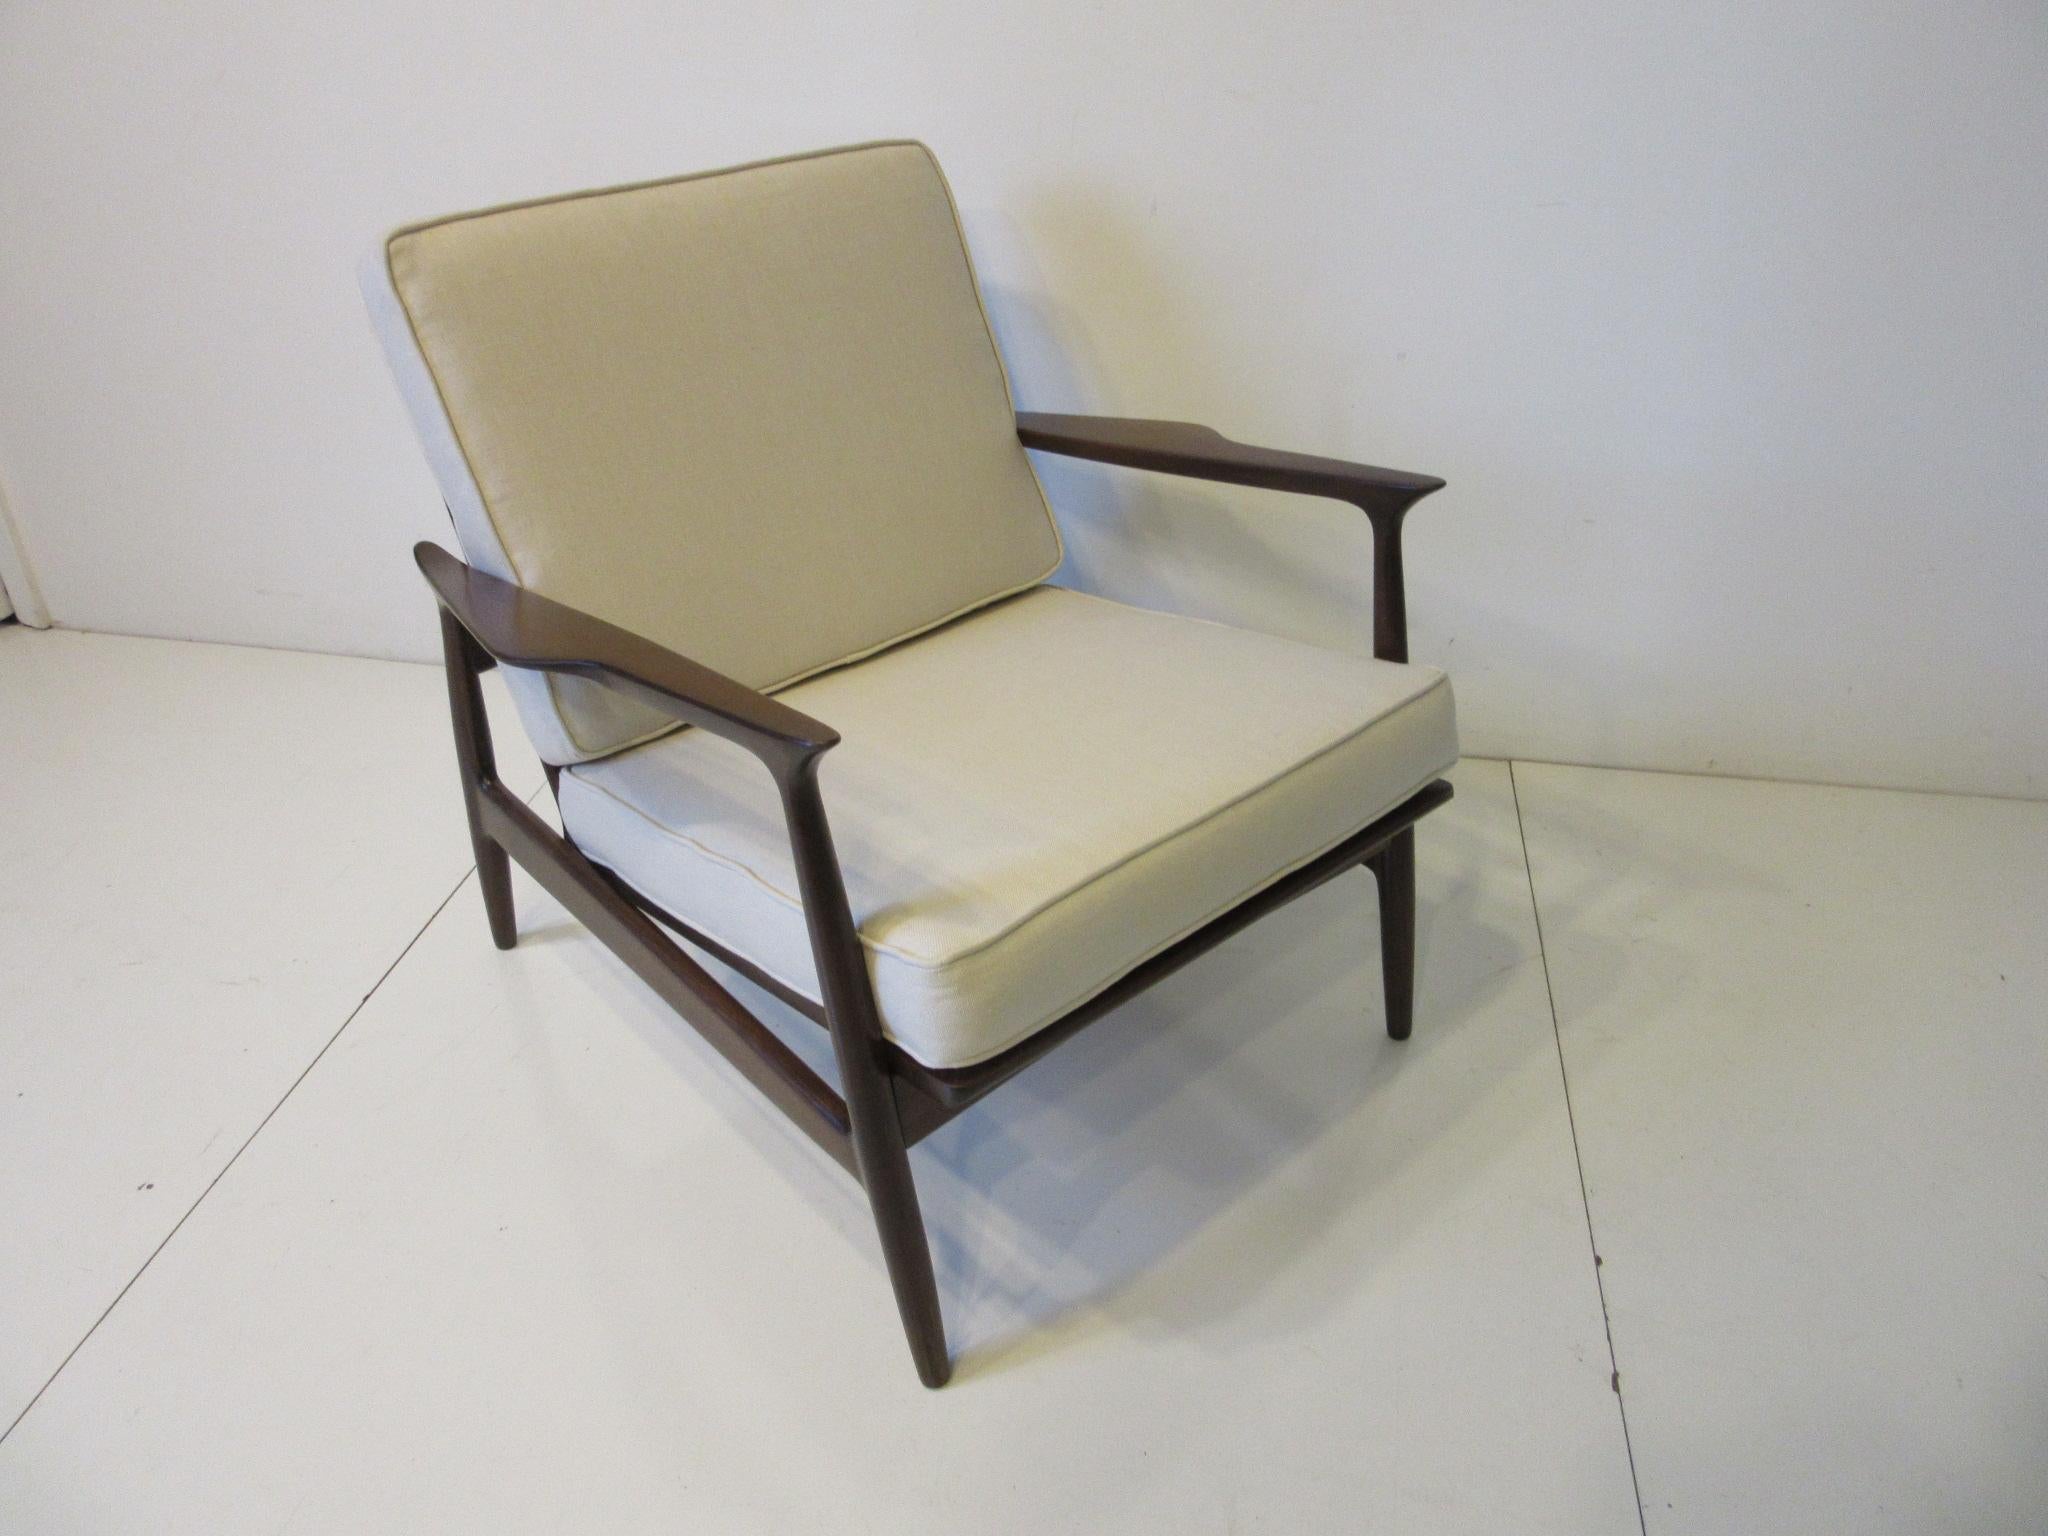 A walnut finished wood framed lounge chair with sculptural arms and two upholstered cushions in a cream colored tight linen styled fabric. This well crafted piece has a painted raffia chair back with brass hardware giving it added detail, made in